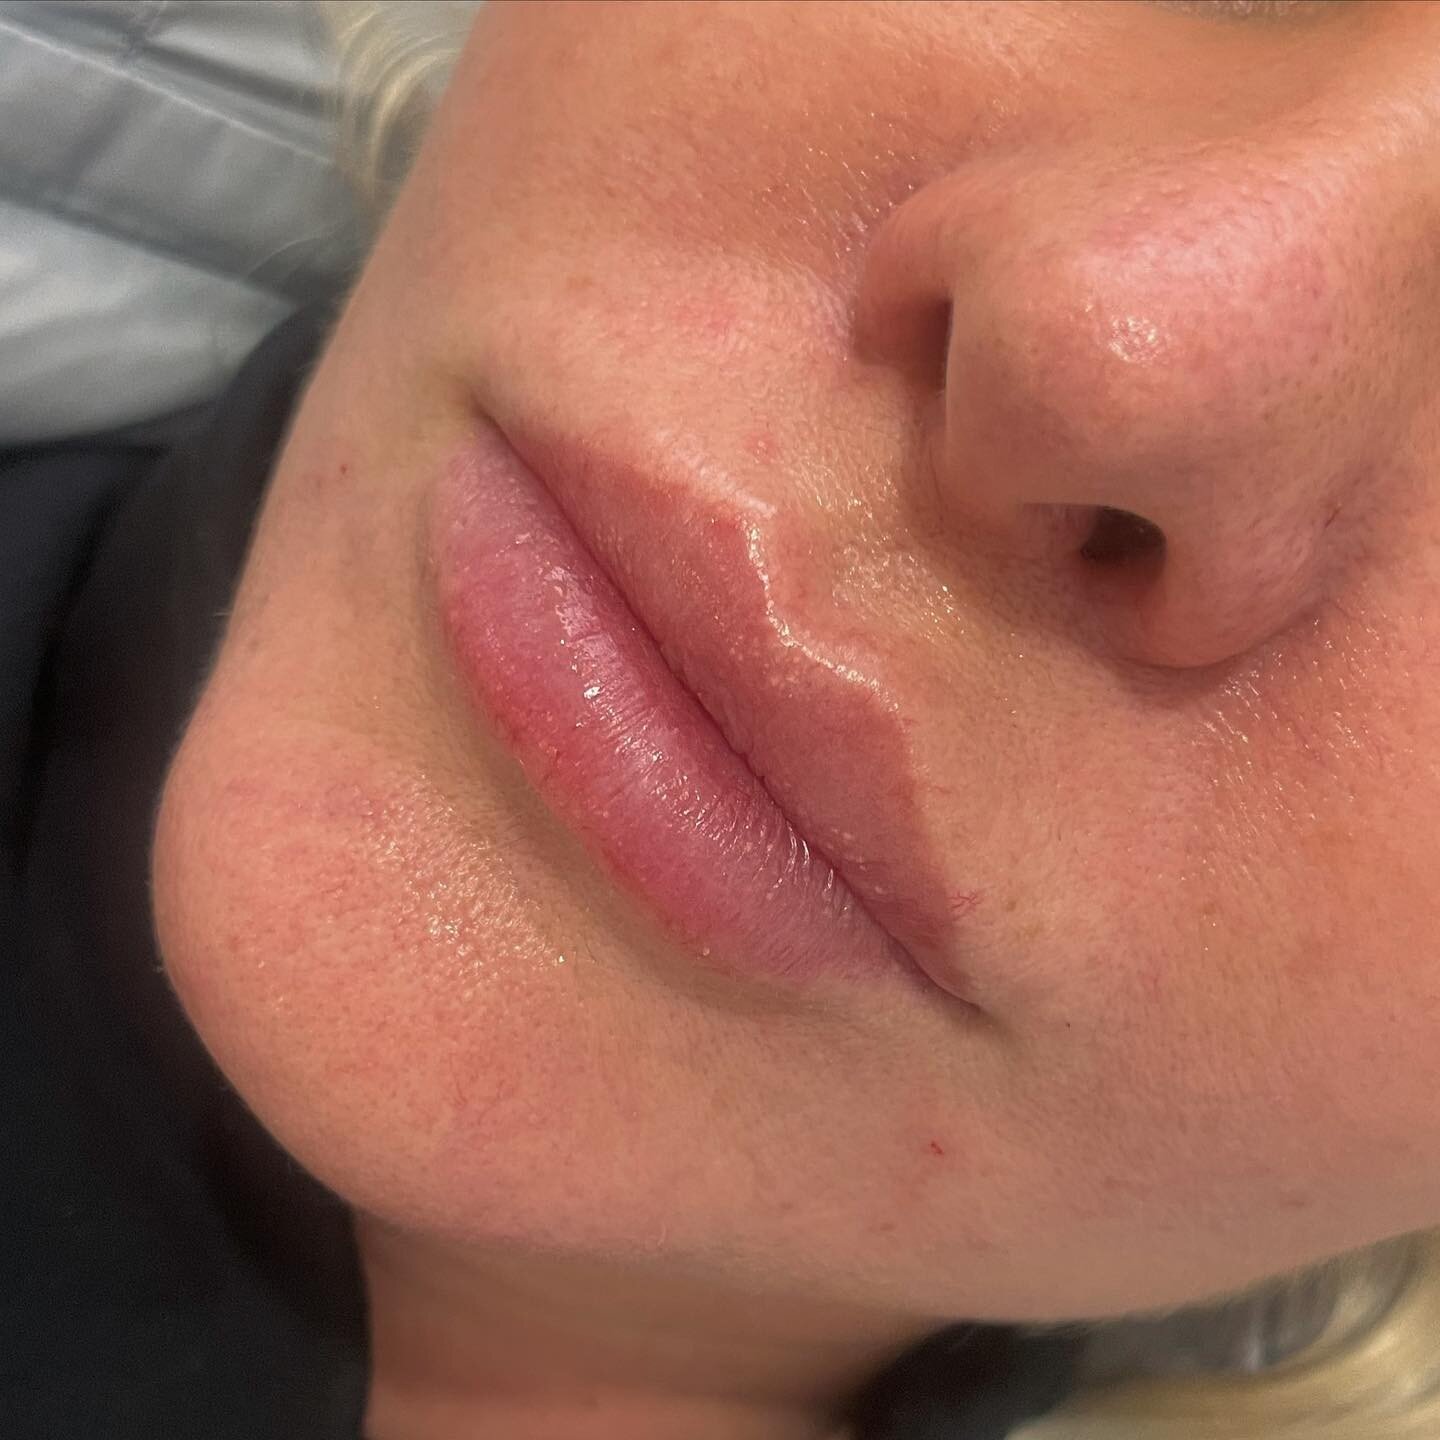 Half syringe top up for this client! ❤️ Beautiful and natural plump 😍 
.
.
#gotox #yourgotobotox #botox #dysport #goodbotox #naturalresults  #wrinklefree  #lipfillers #gotoxbotox #wrinkleprevention #lips #foreheadlines #frownline #botoxtreatment #be